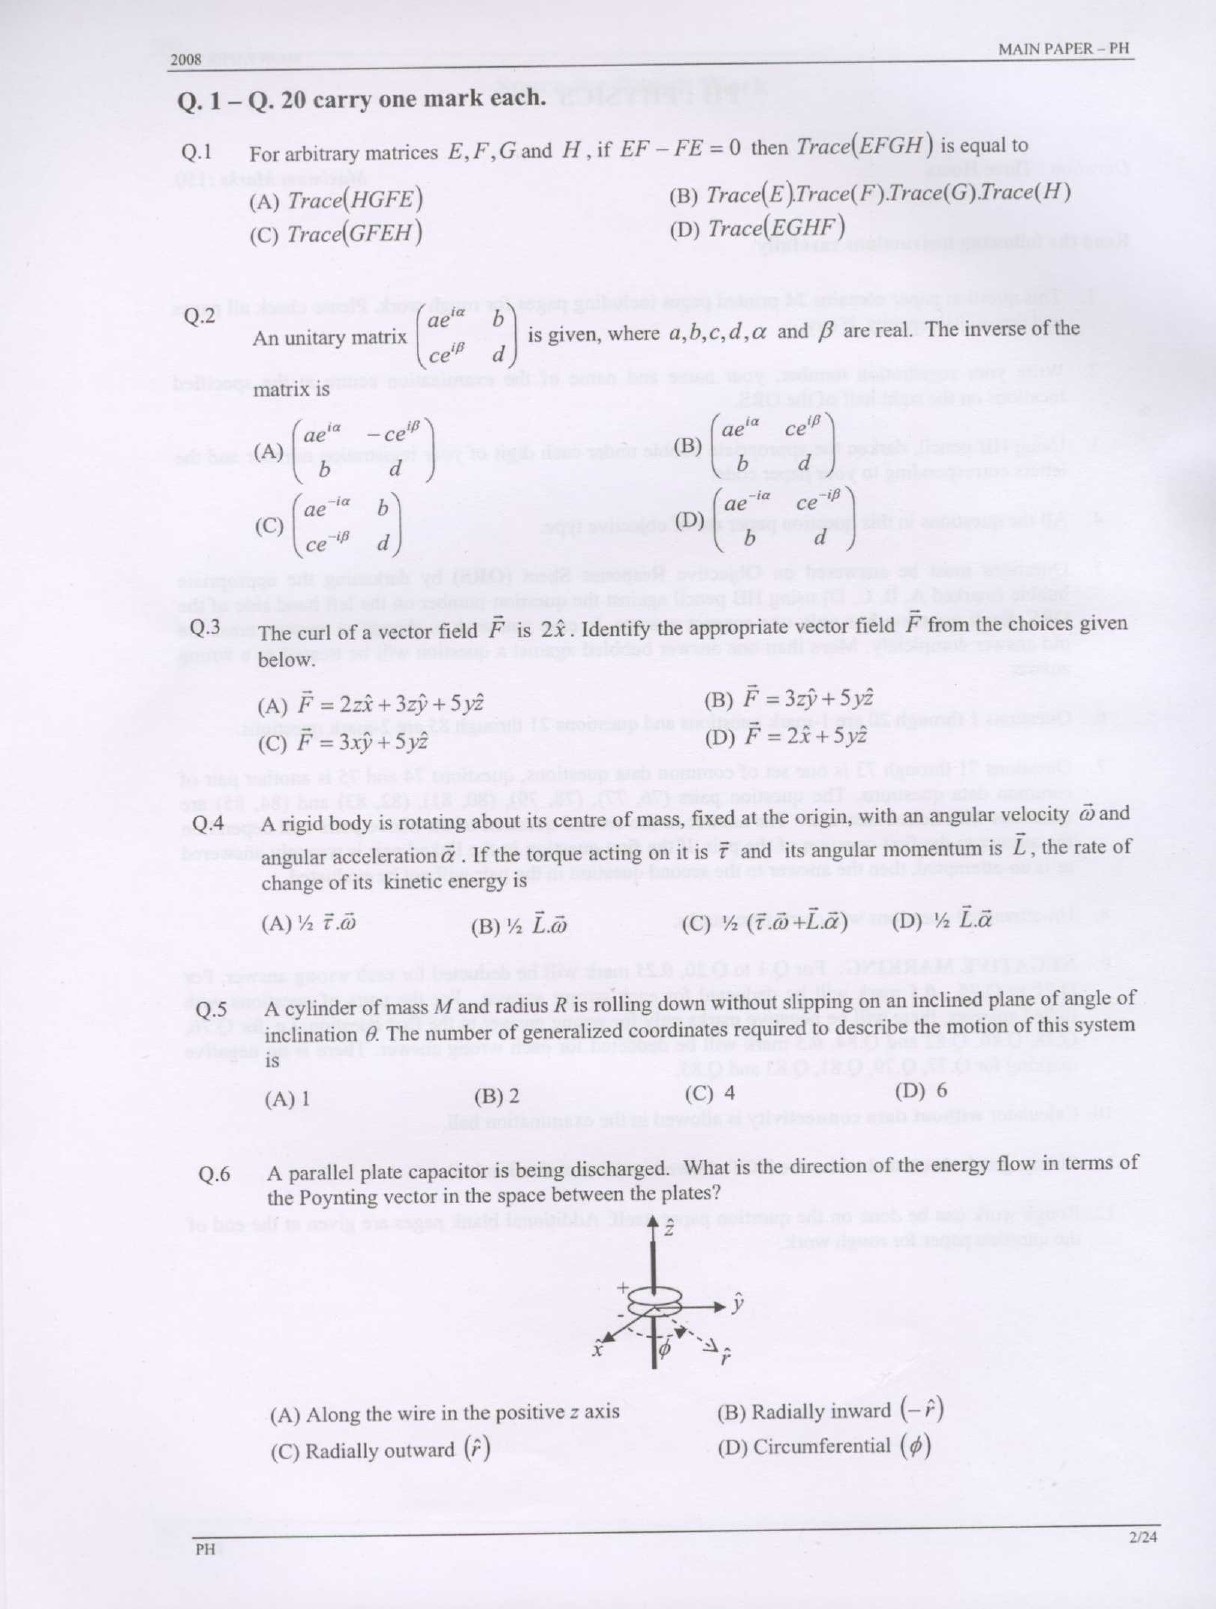 GATE Exam Question Paper 2008 Physics 2